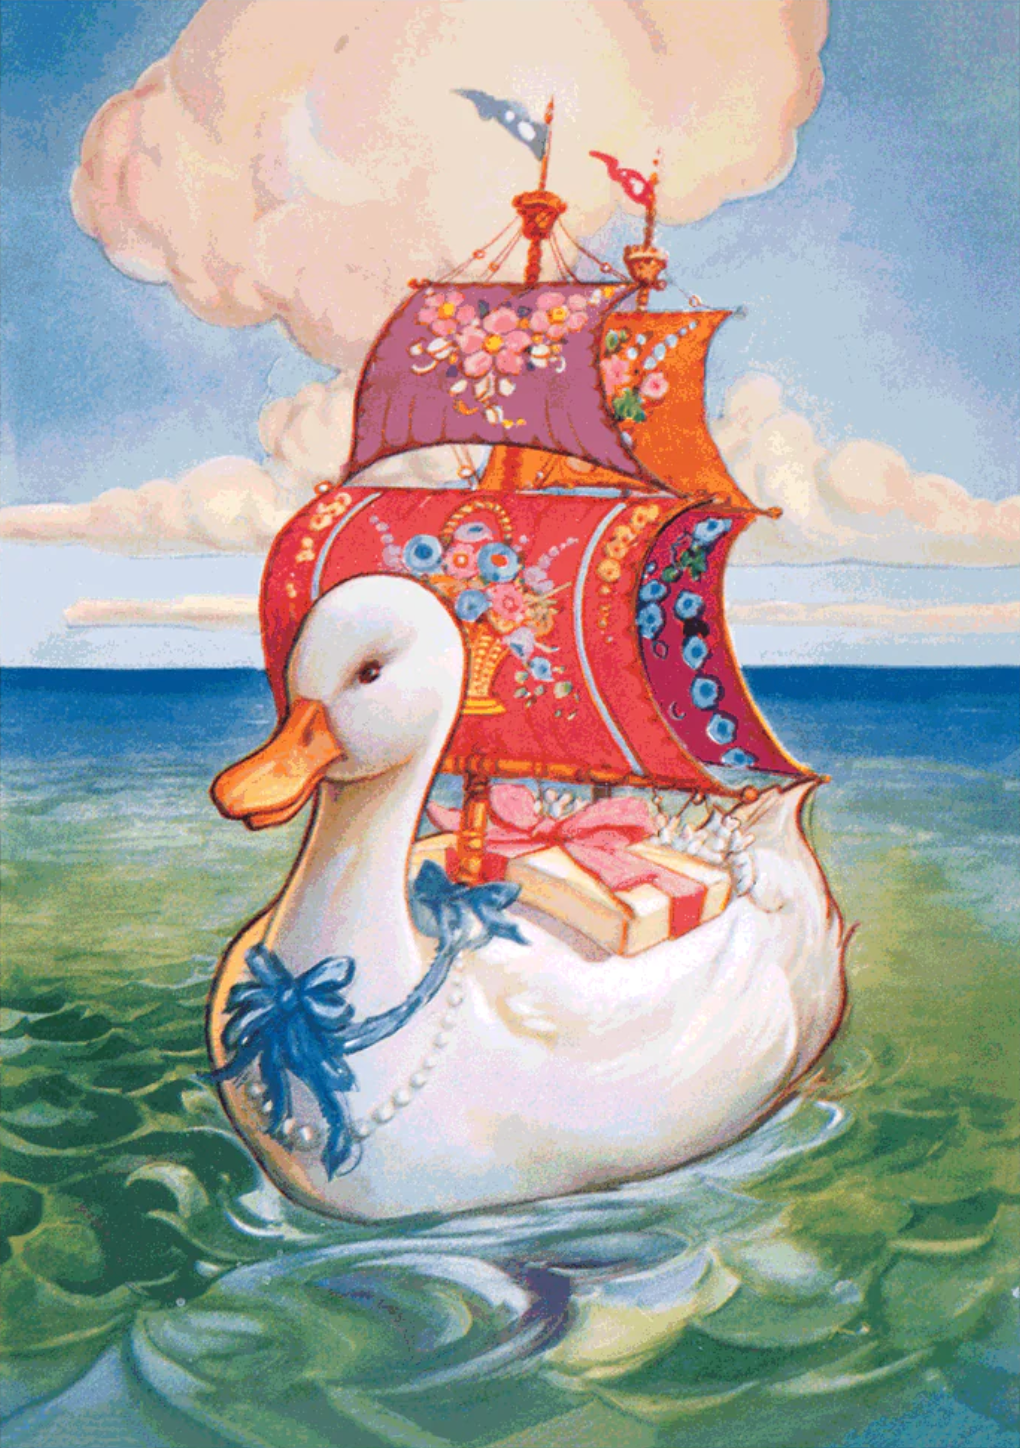 A whimsical illustration of a goose-shaped ship full of presents sailing on the water